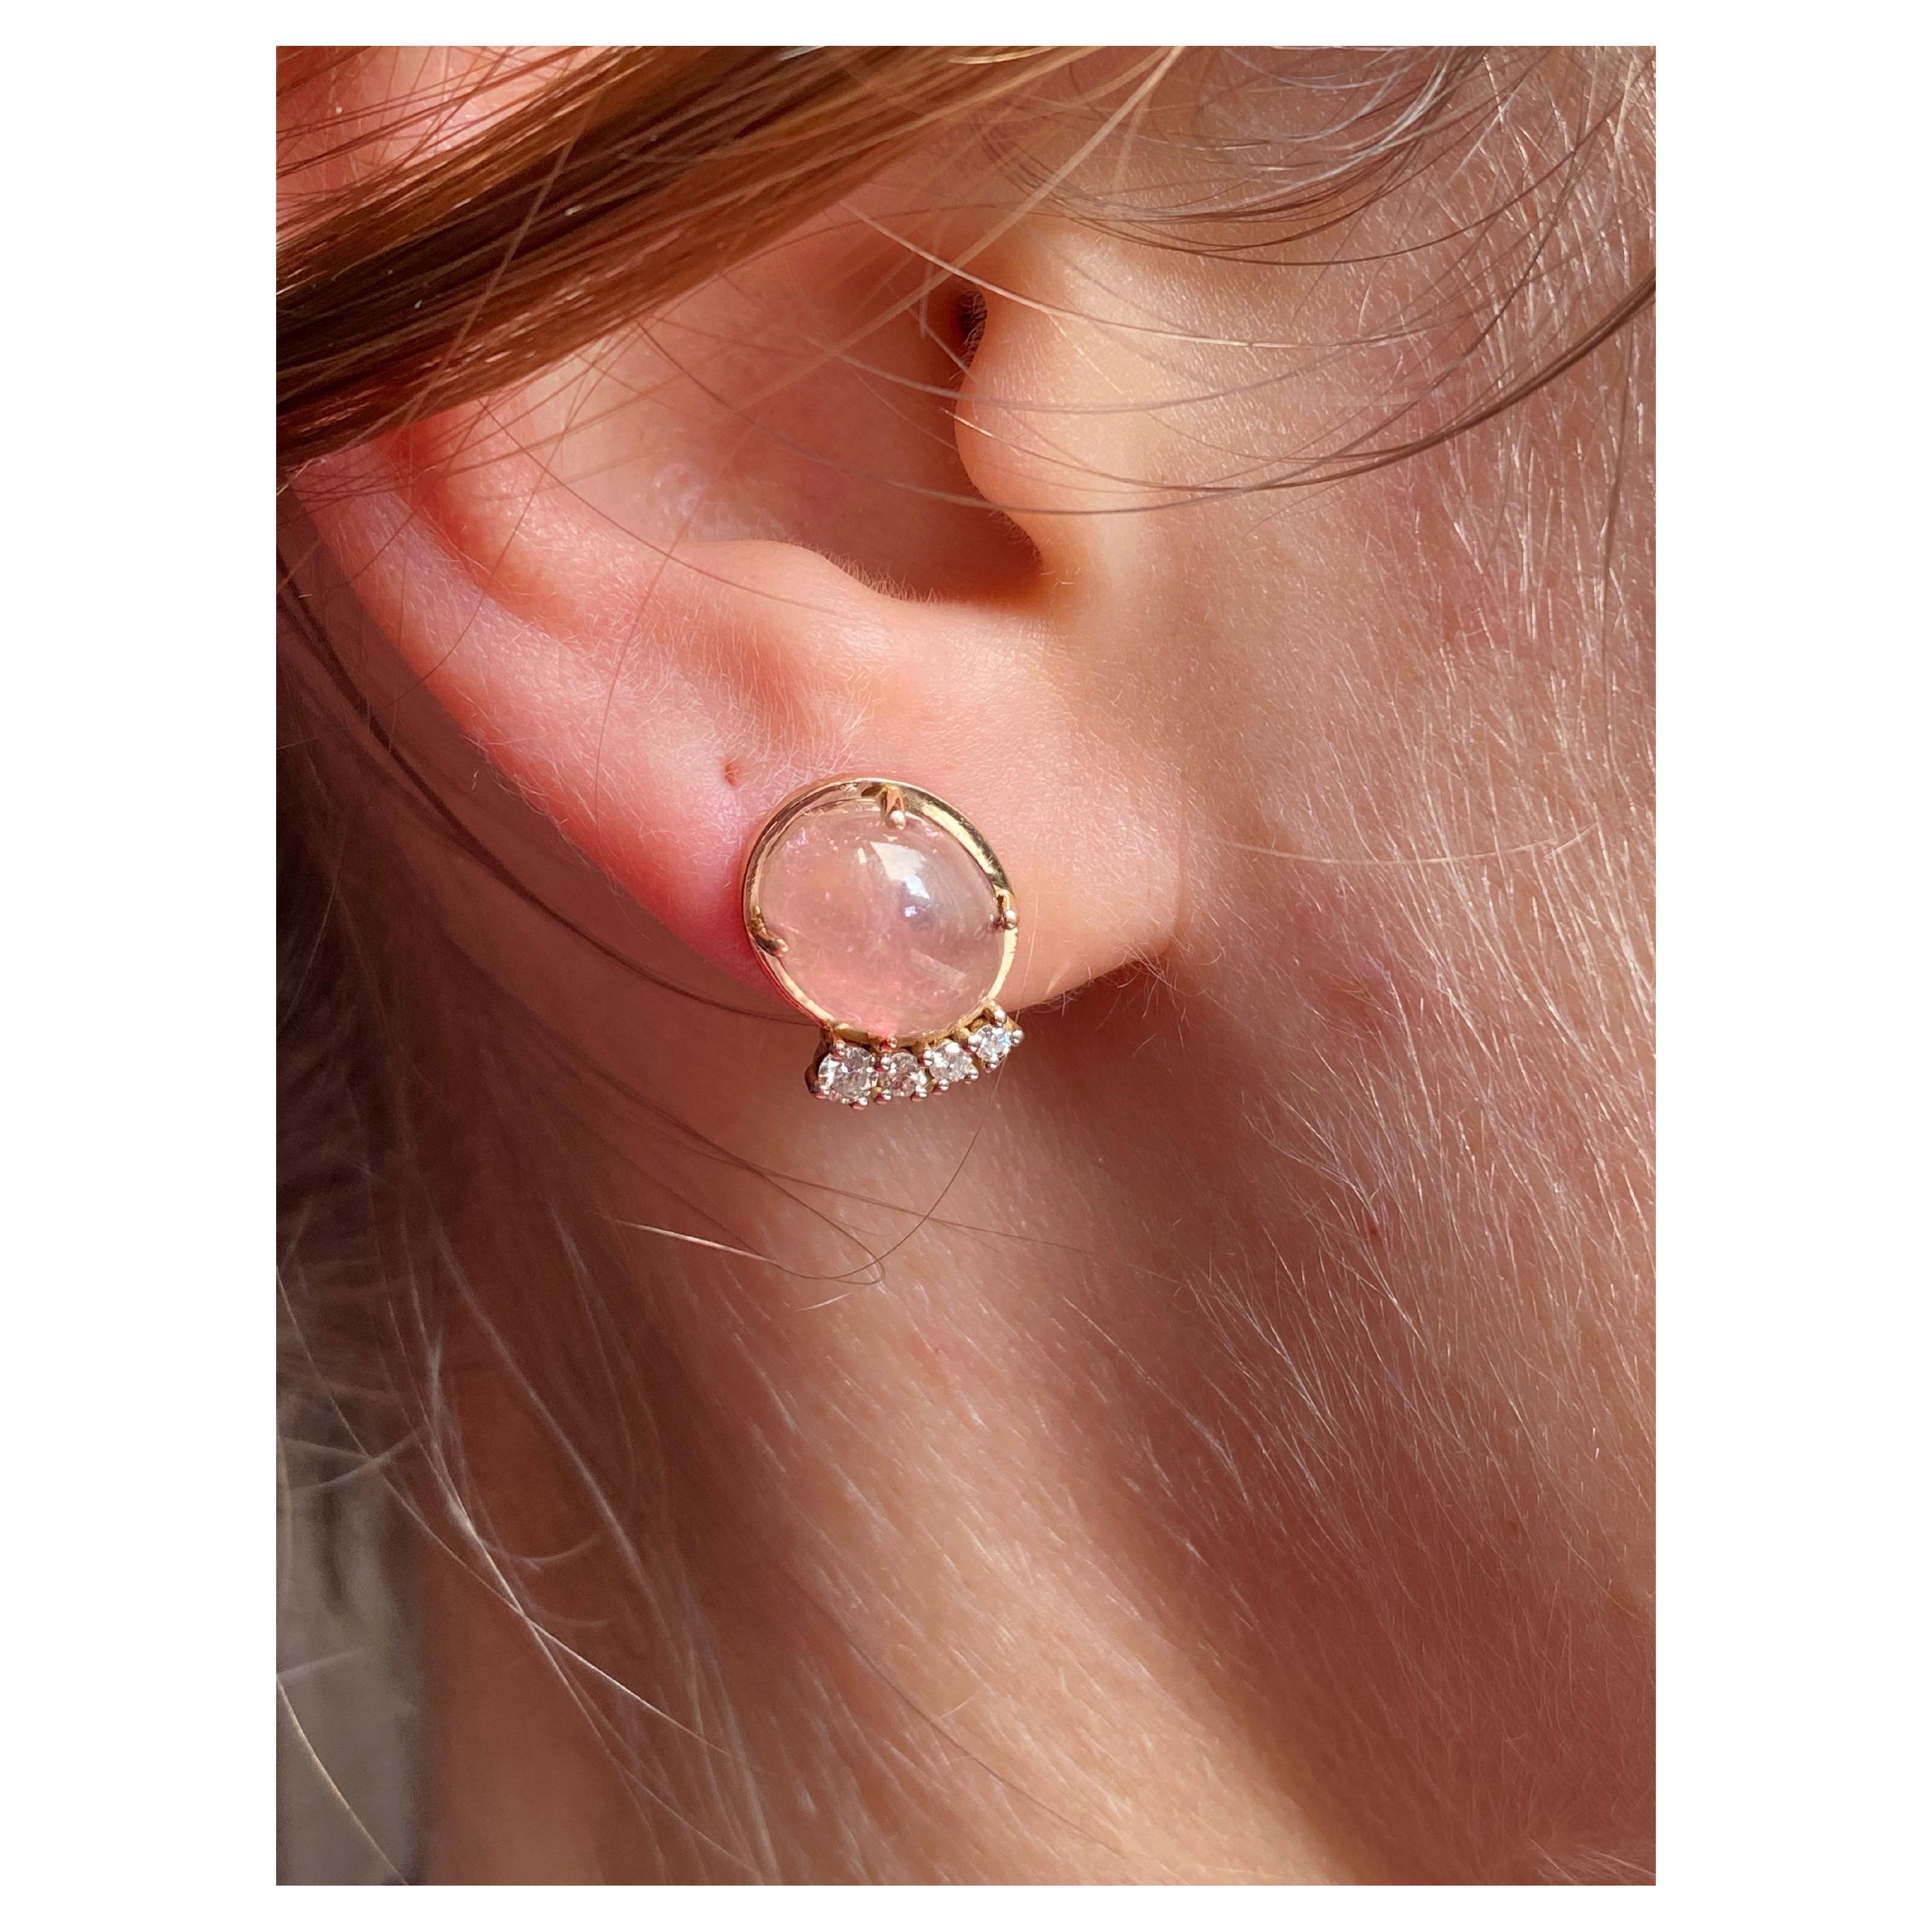 Rossella Ugolini Design Collection Stud Earrings Handcrafted in 18 Karat Rose Gold 0.22 Carats White Diamonds and Rose Quartz Oval cut . 
Dimension 1.4 cm x 1.1 cm h. 0.5 mm
0,55 in x 0,43 in h 0,19 in
Clip-on available on request. The 0,22 carats